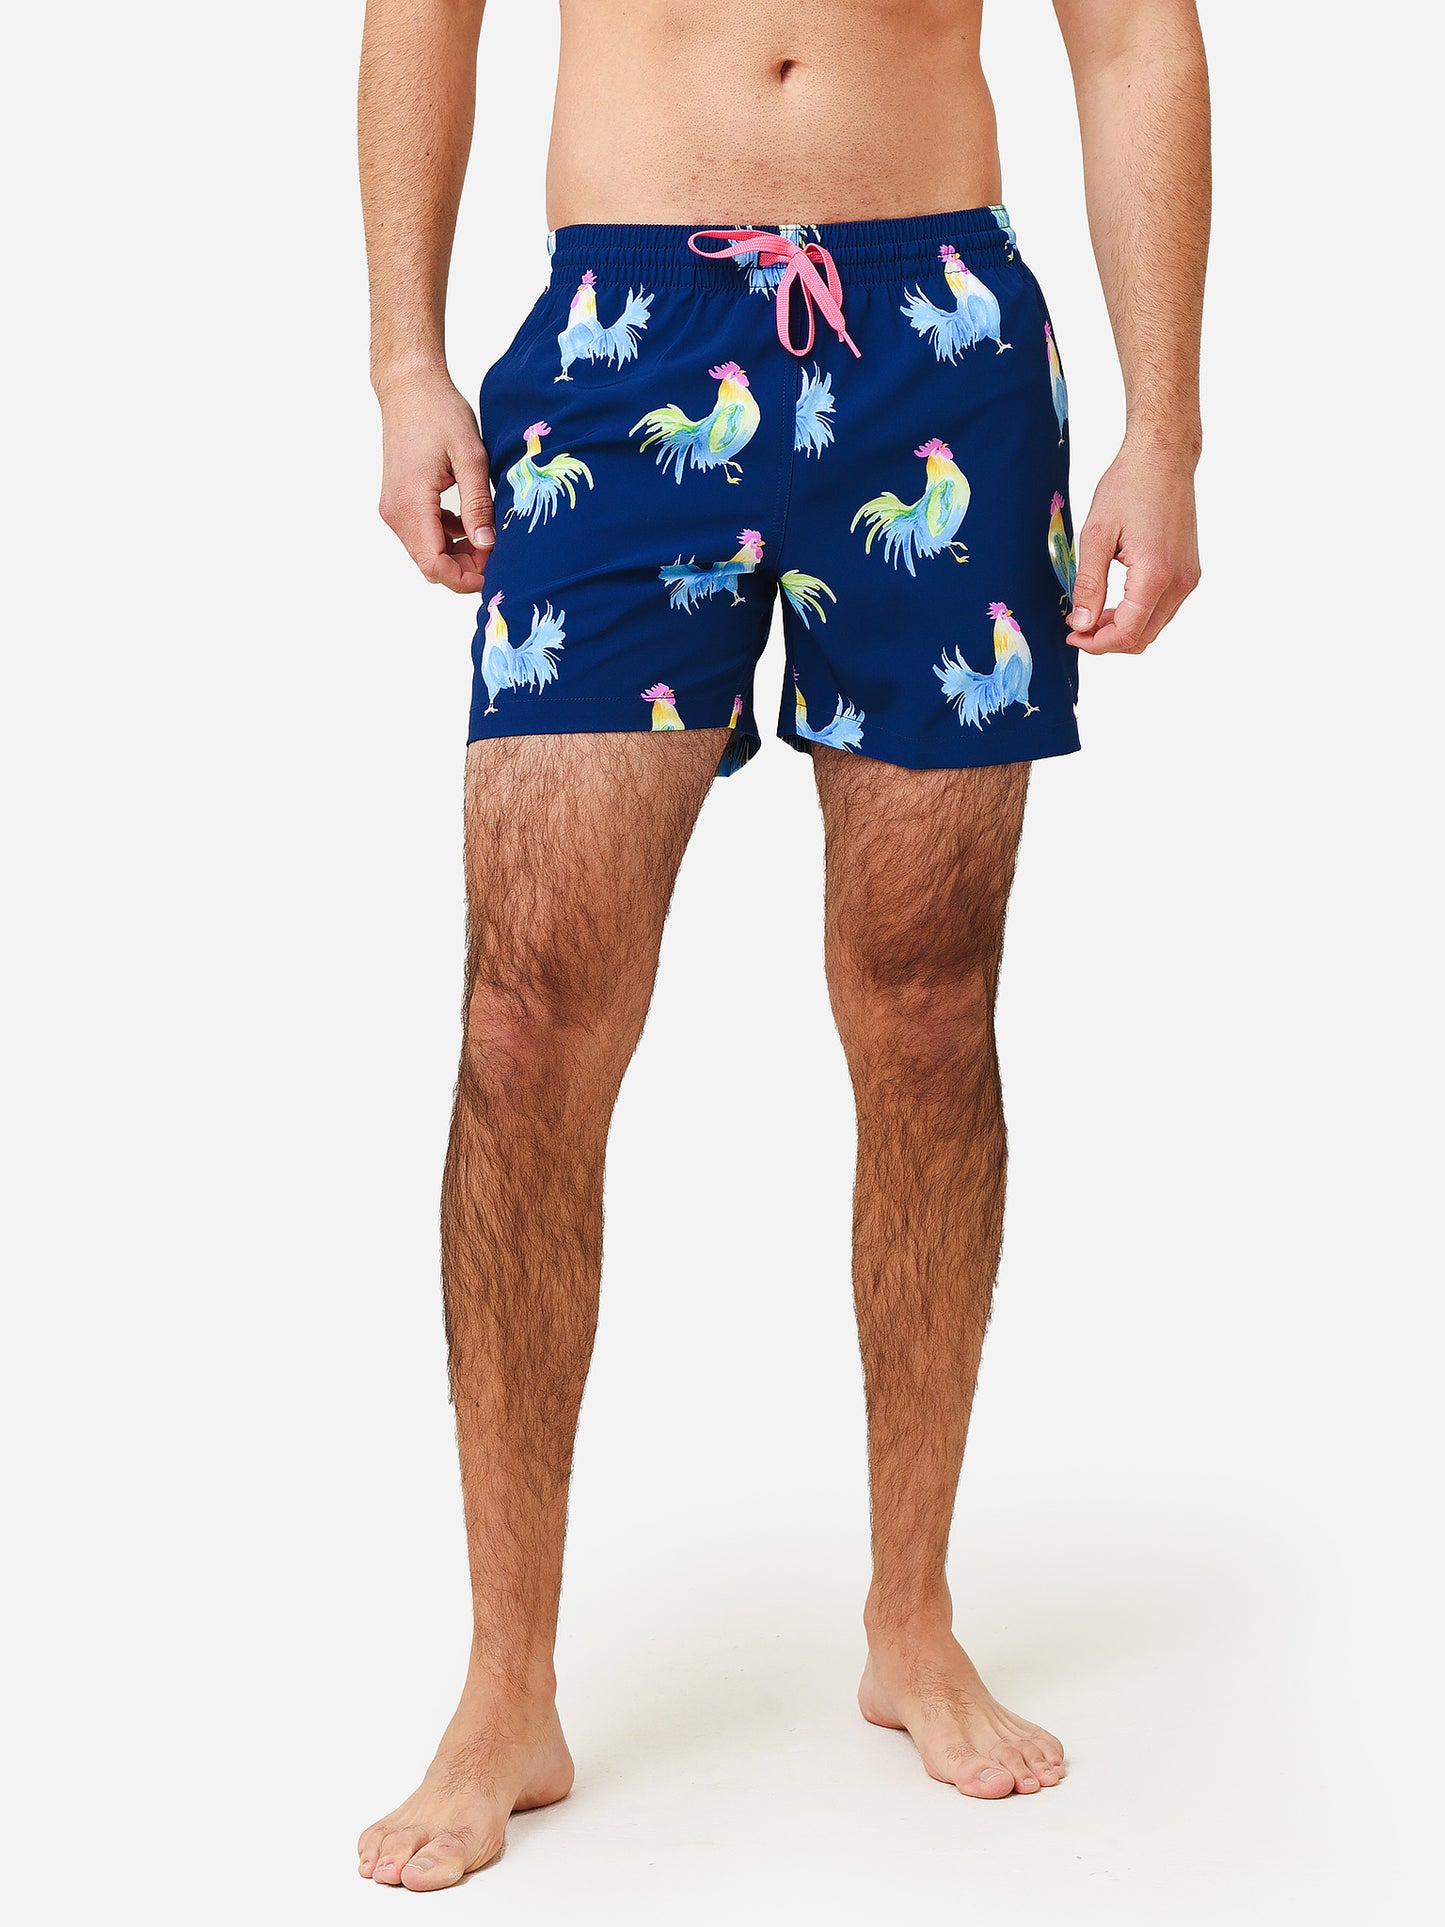 Men's Chubbies The Fowl Plays 5.5-inch Swim Trunks - Large / Navy